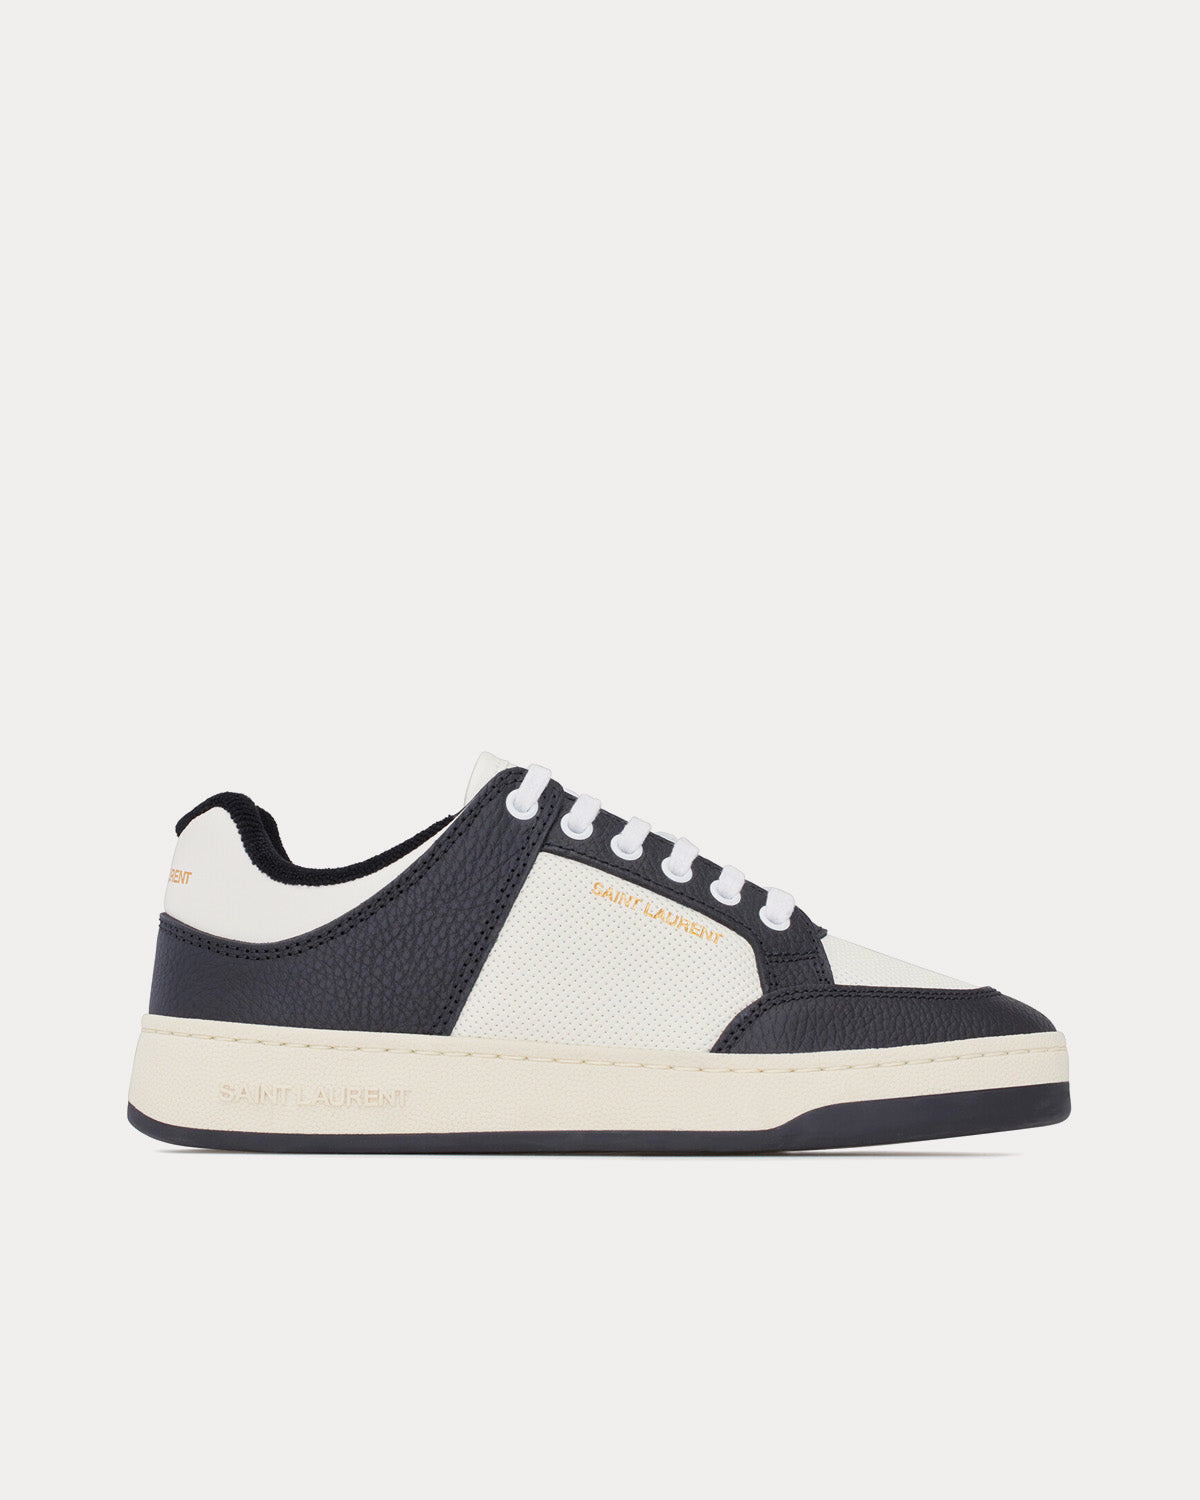 Saint Laurent - SL/61 Smooth & Grained Leather White / Black Low Top Sneakers